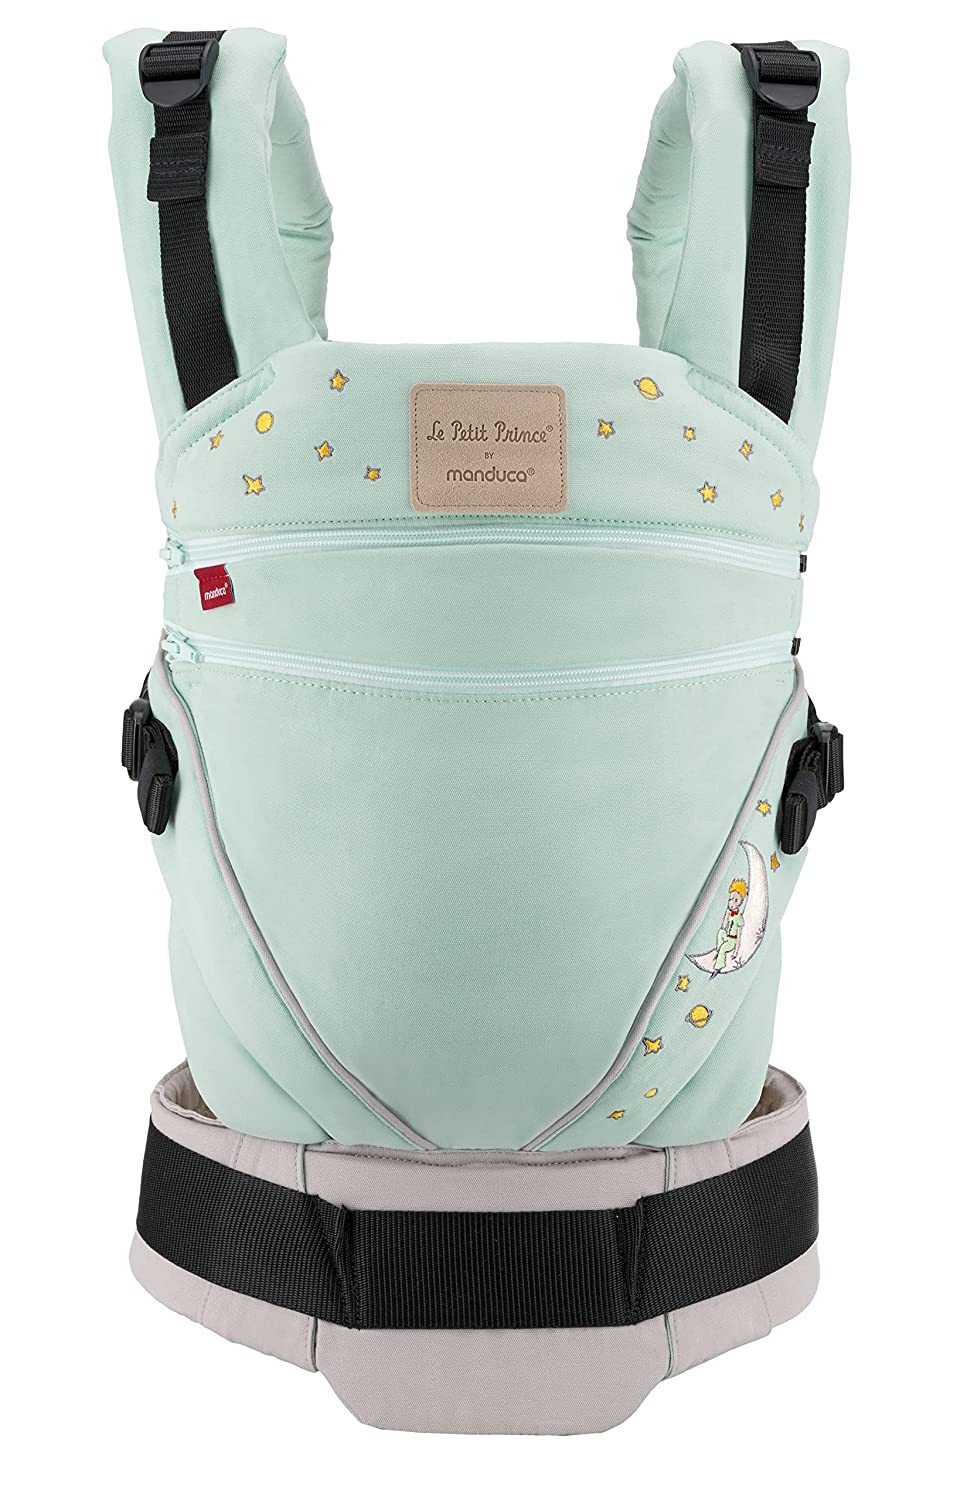 manduca XT Baby Carrier < All-In-One Baby Carrier for Newborns from Birth, Babies & Toddlers (3.5 - 20 kg), Adjustable Seat, 3 Carrying Positions, Organic Cotton (Le Petit Prince® by manduca® XT, Lune)